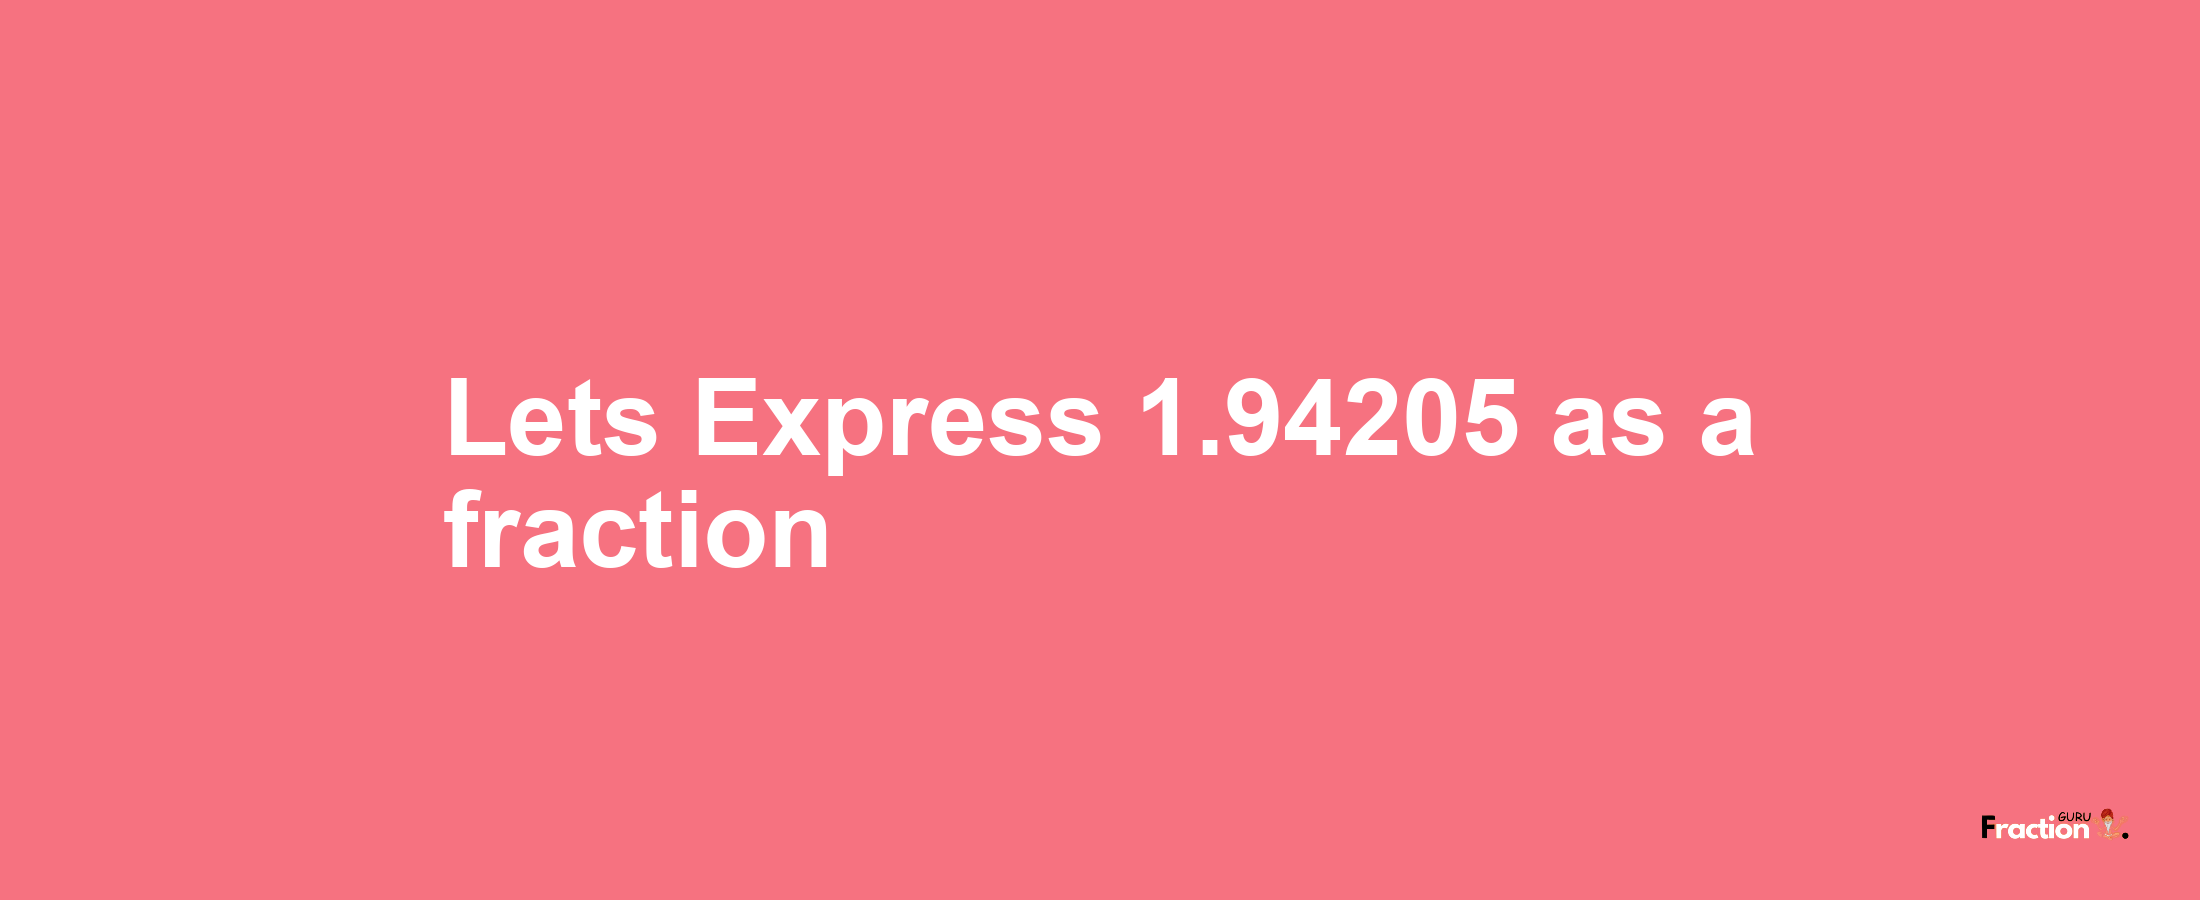 Lets Express 1.94205 as afraction